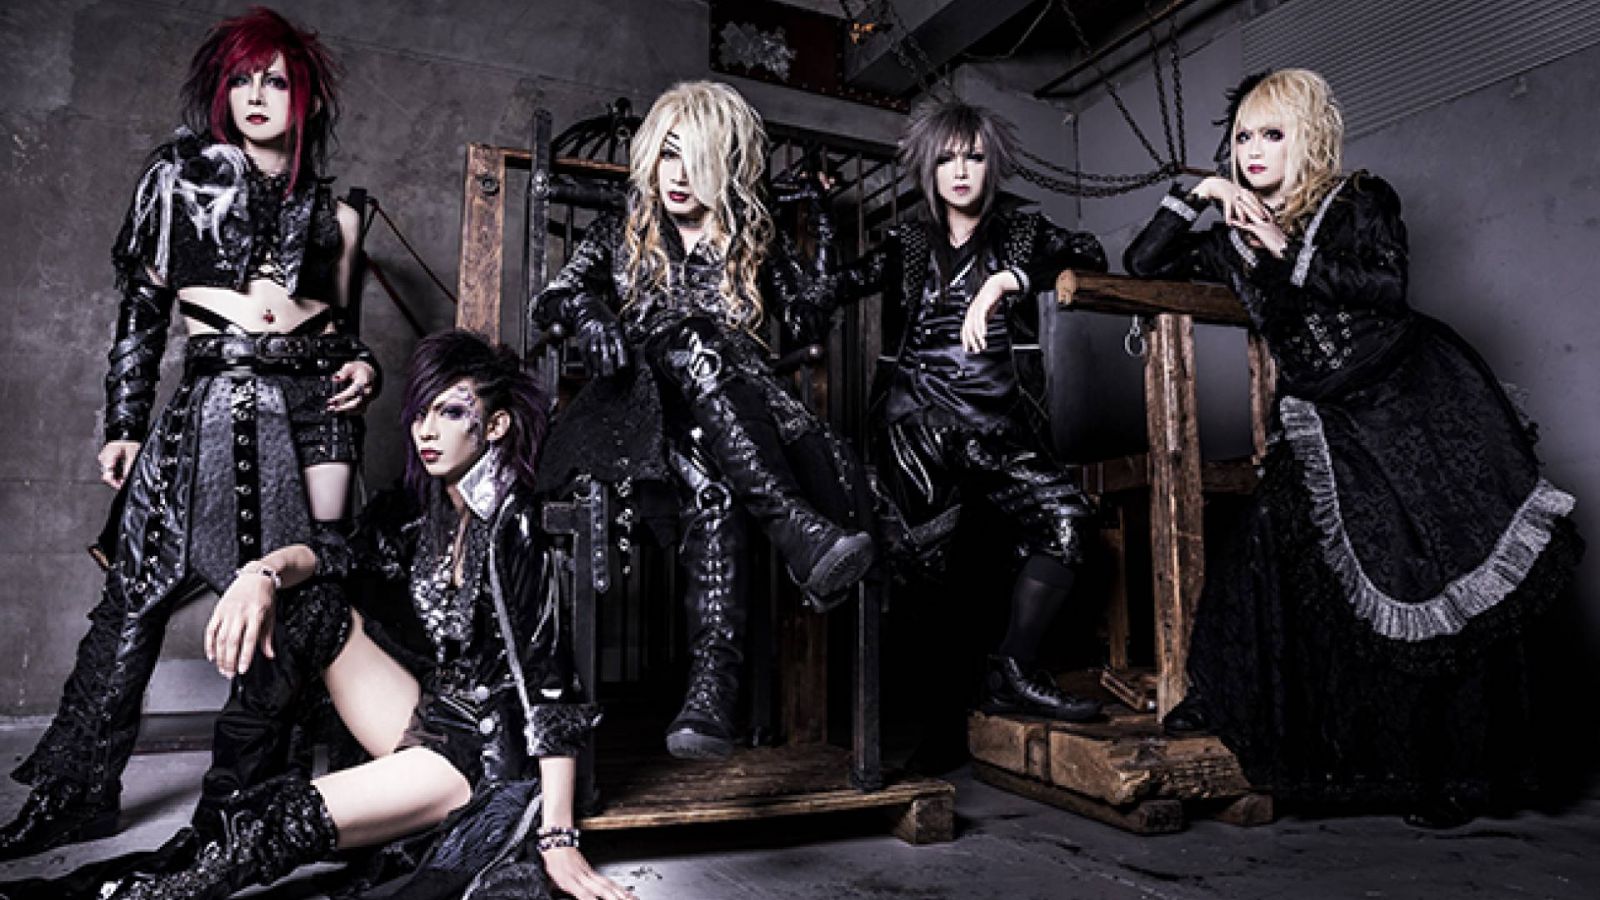 Interview with Scarlet Valse © Starwave Records. Provided by Royal Stage